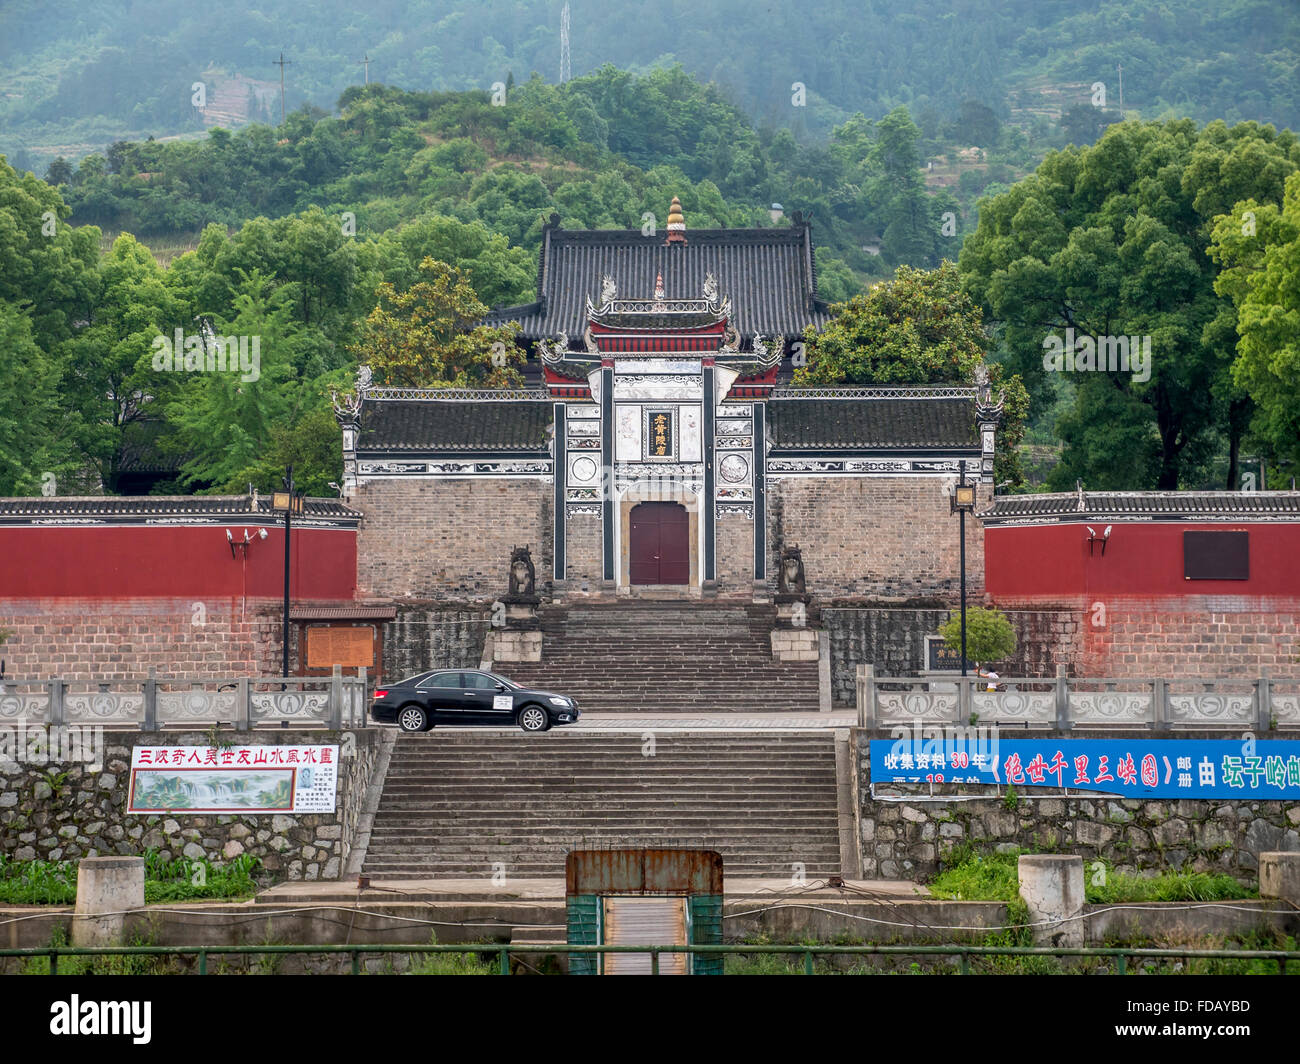 Huangling Temple On The Banks Of The Yangtze River At Sandouping A Town Near The Three Gorges Dam Yichang, Hubei Province China Stock Photo